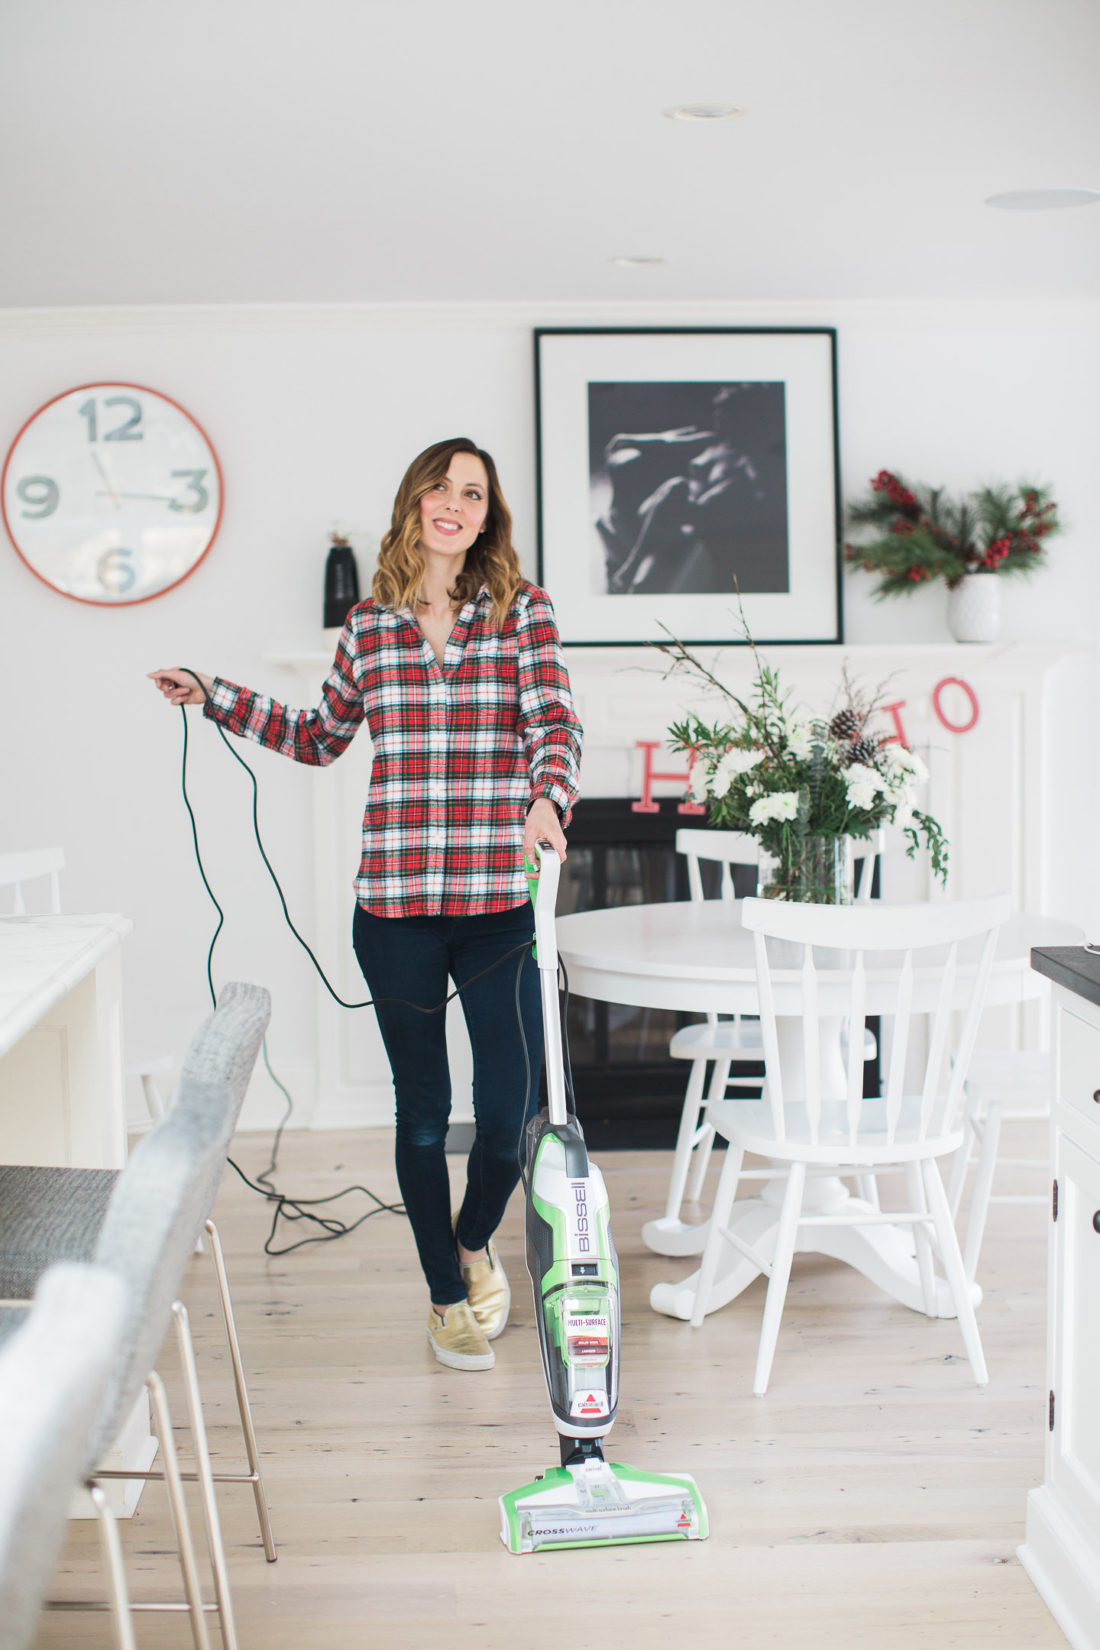 Eva Amurri Martino vacuums in her kitchen wearing a plain flannel shirt and blue jeans